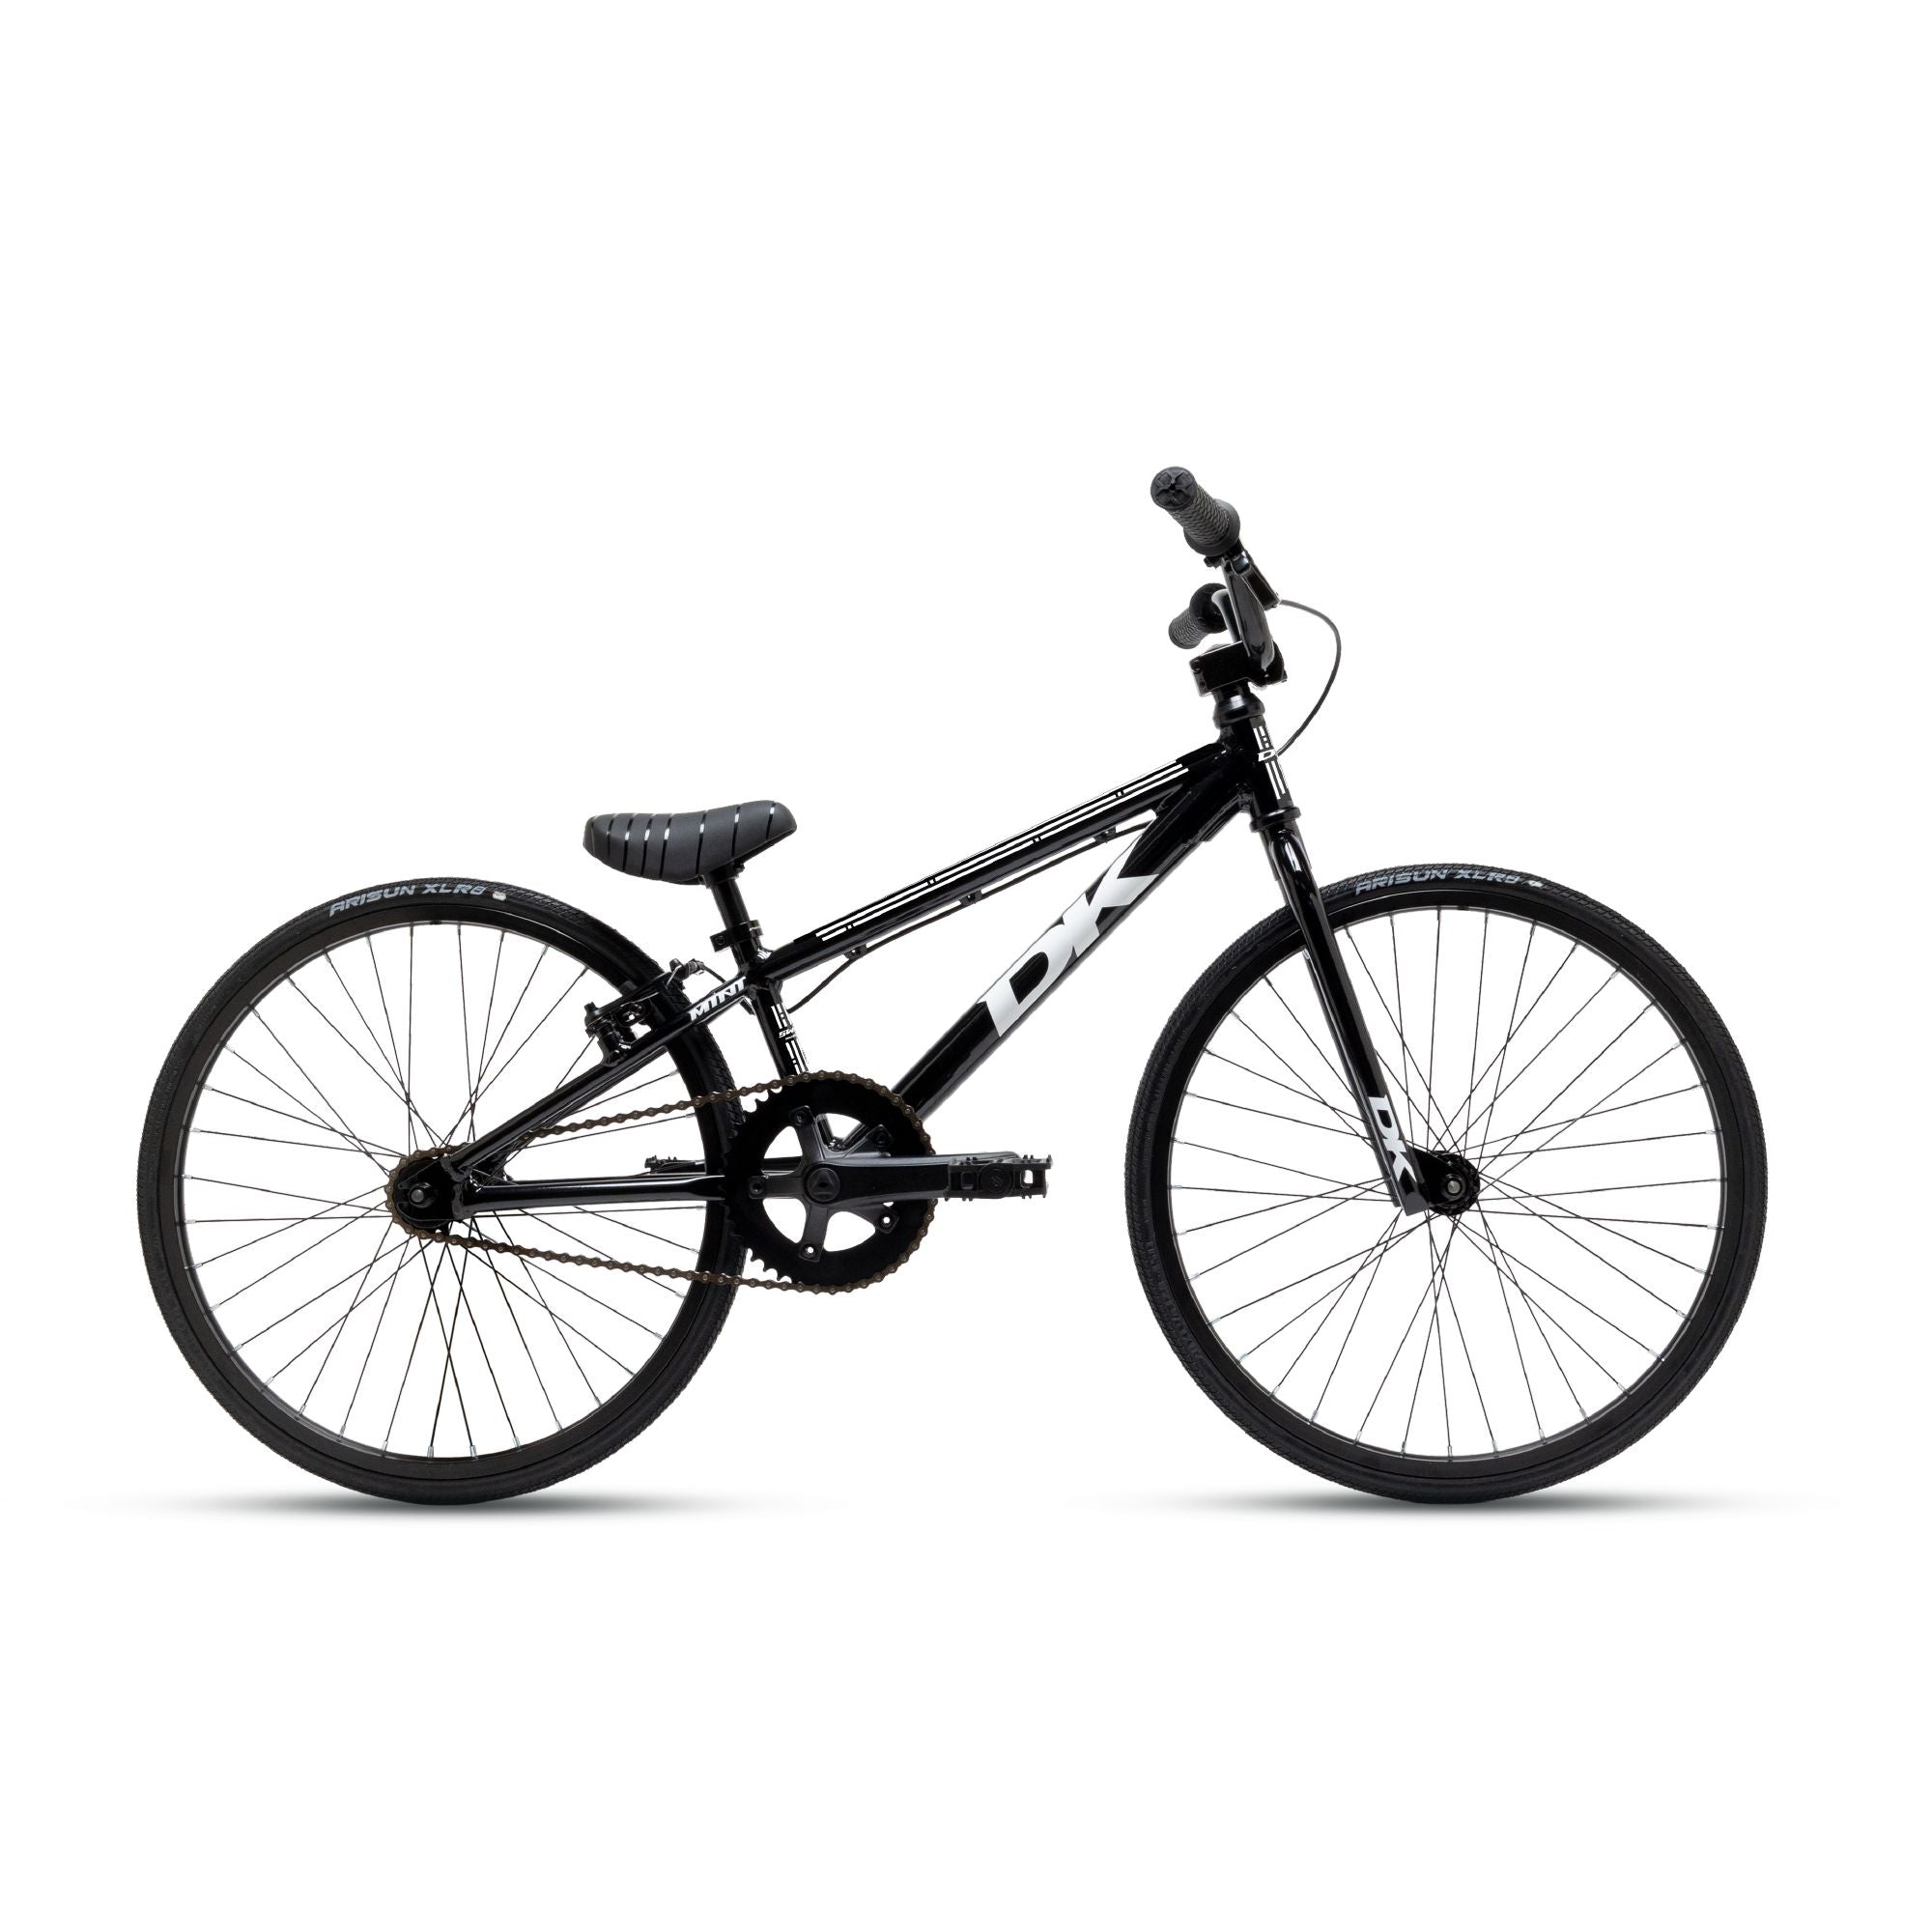 A black DK Swift Mini Bike with white lettering on the frame and black tires, positioned upright on a white background. This model features a lightweight aluminium frame.